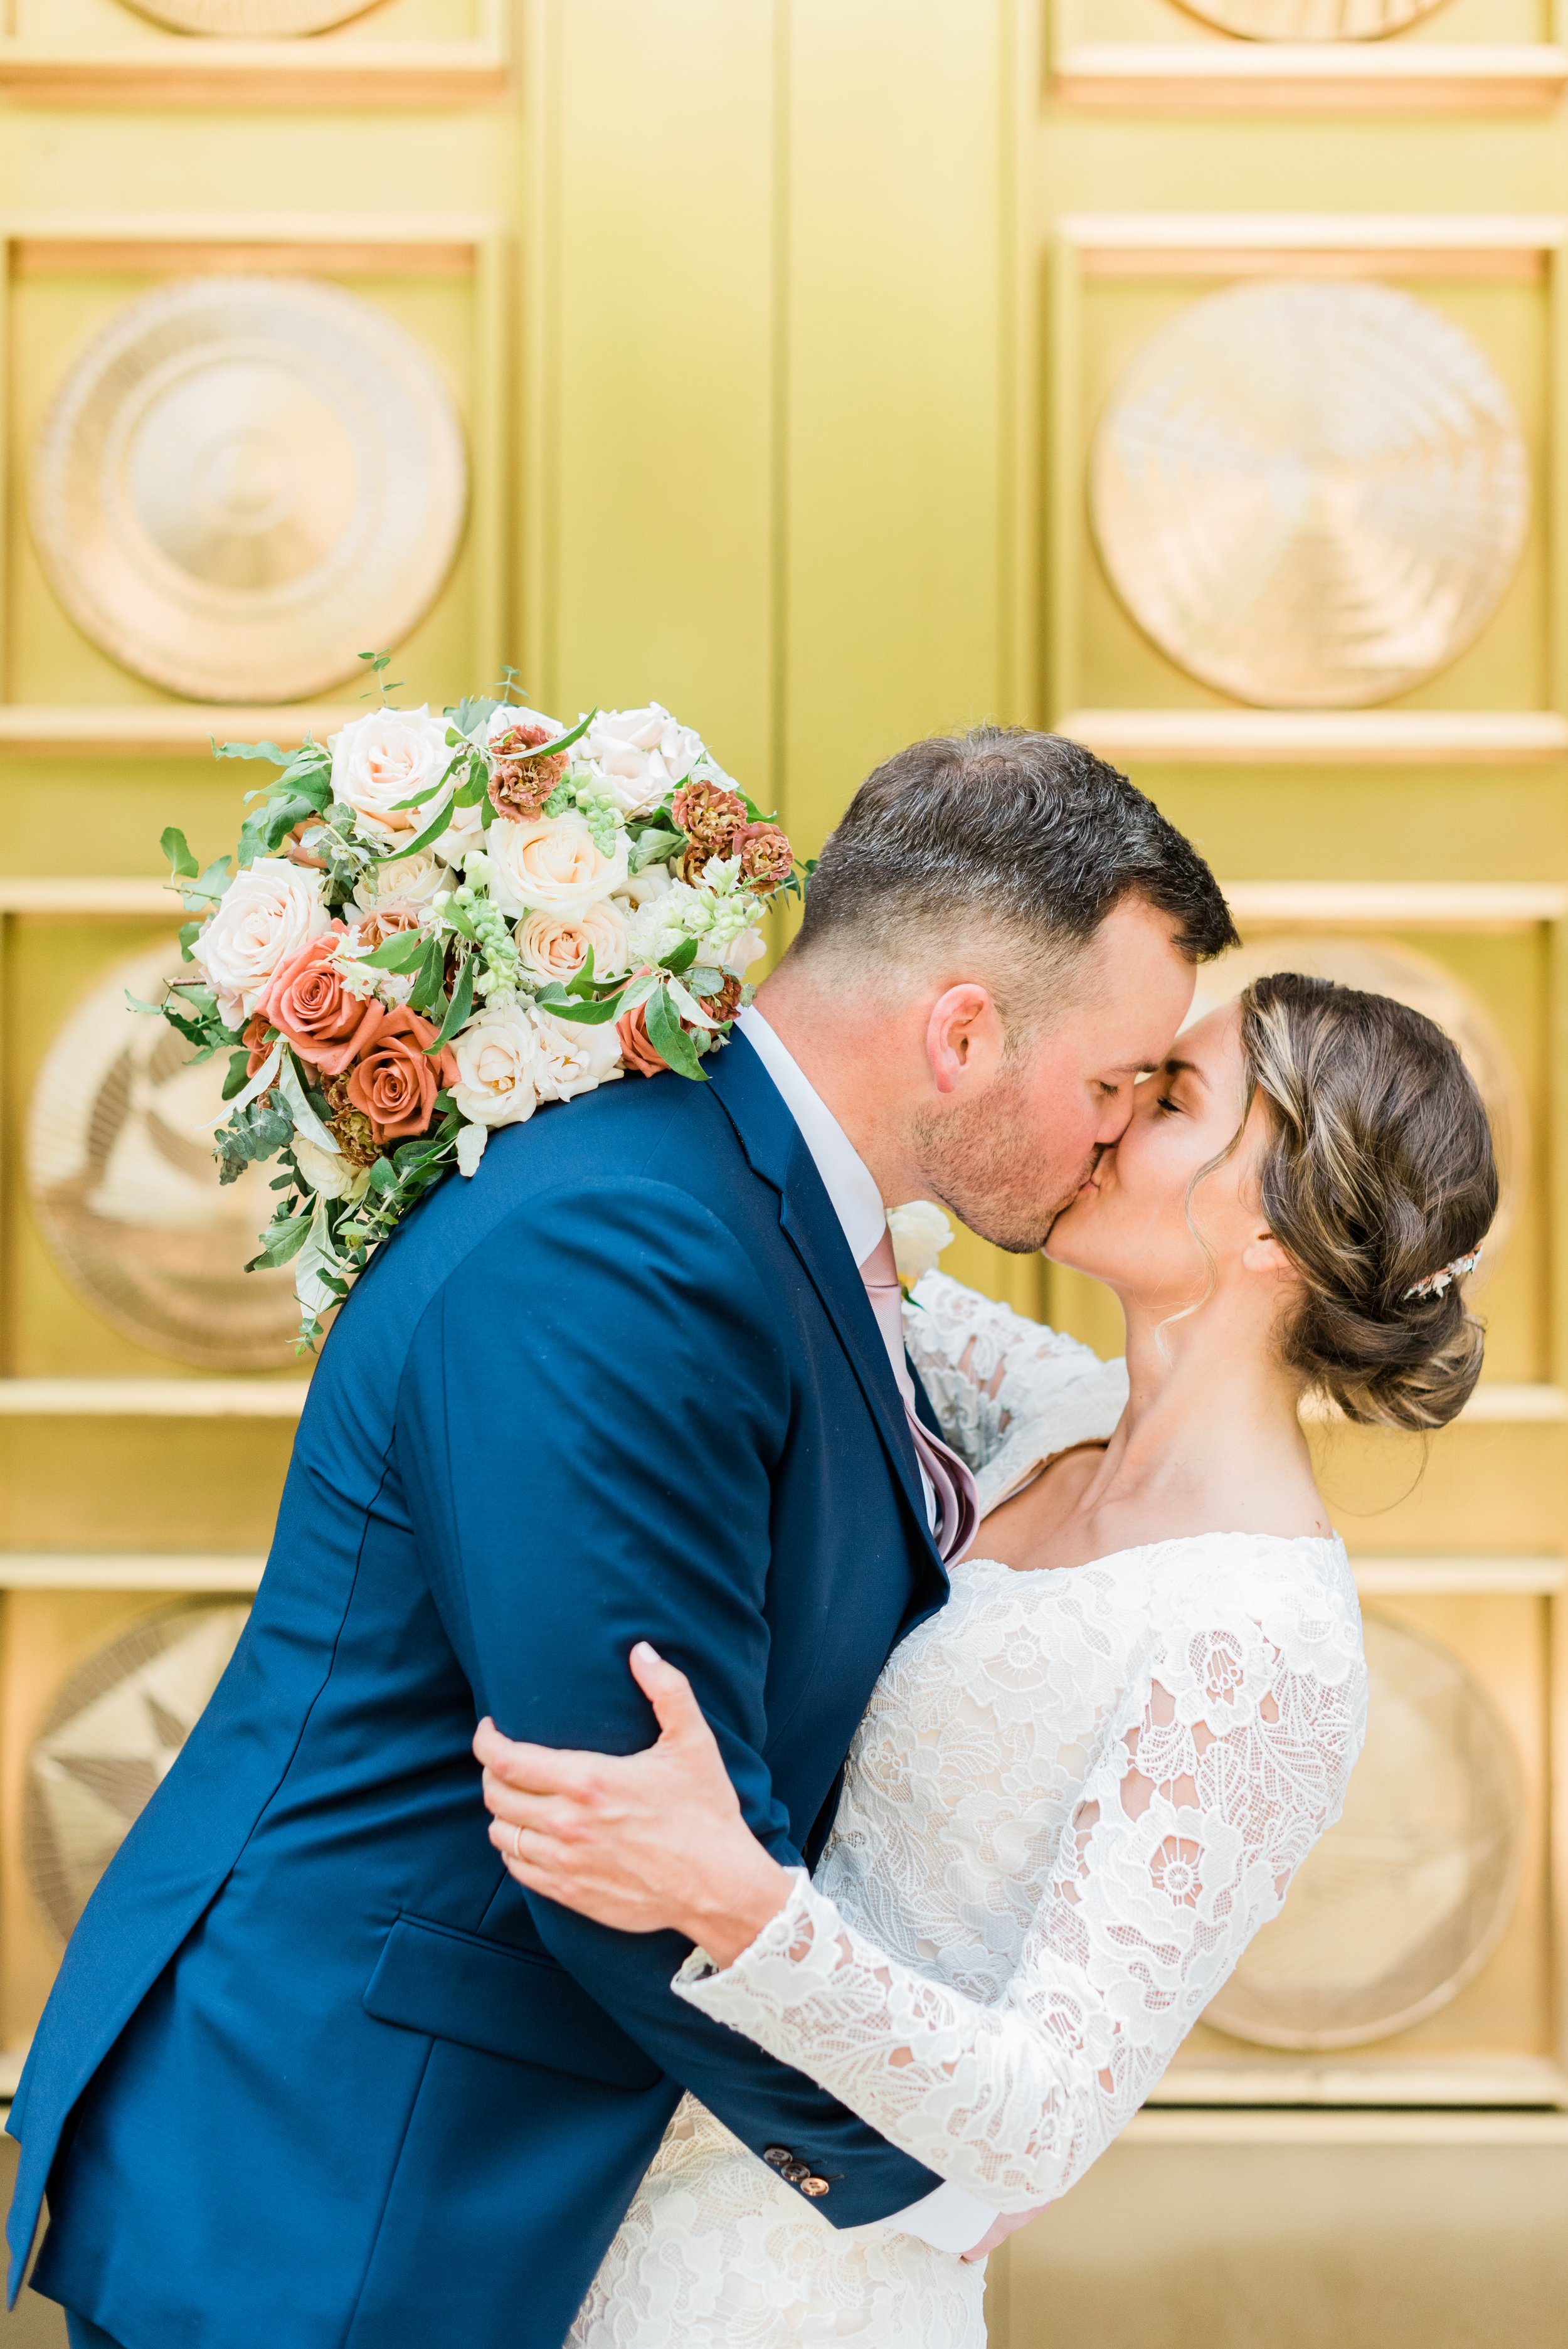  This gorgeous bride and groom share a kiss after their temple exit in Atlanta, GA.&nbsp; #marylandweddingphotographer #atlantaweddingphotographer #brideandgroom #justmarriedphotos #bridalportraits #weddingdayphotos #Atlantatemplewedding #atlantaldst